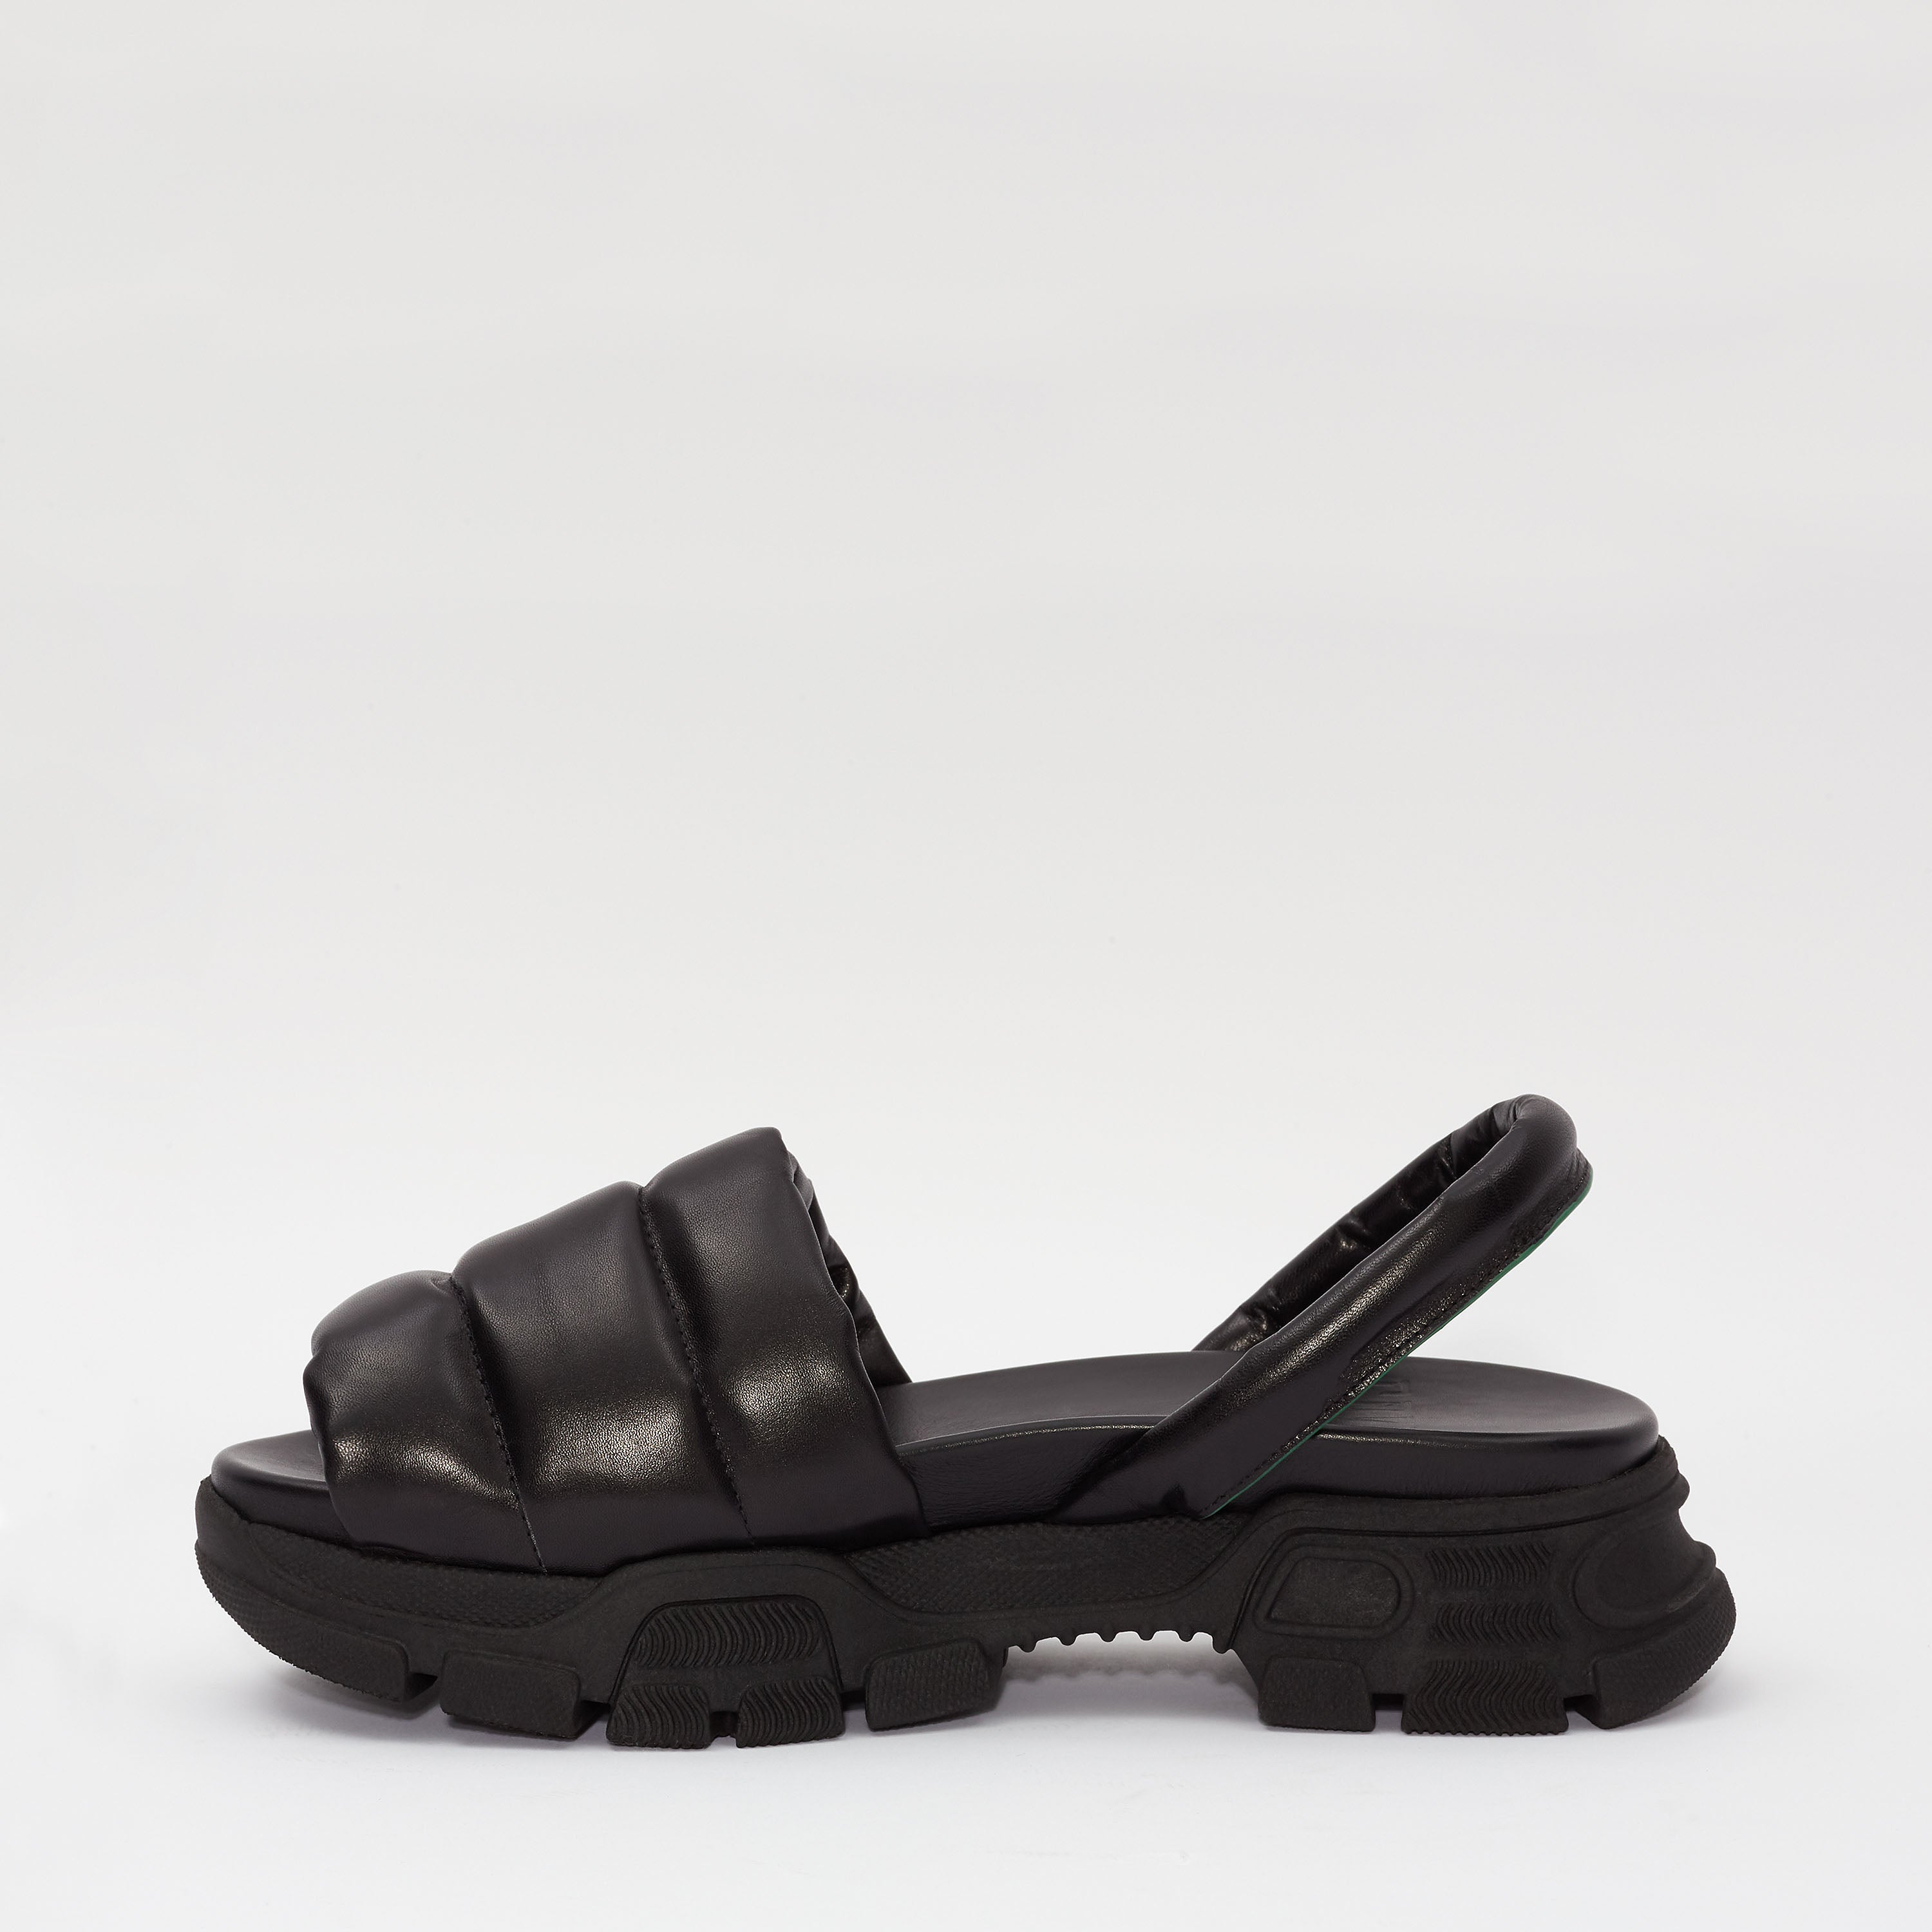 GOYA Quilted Sporty Sandal, made in Spain